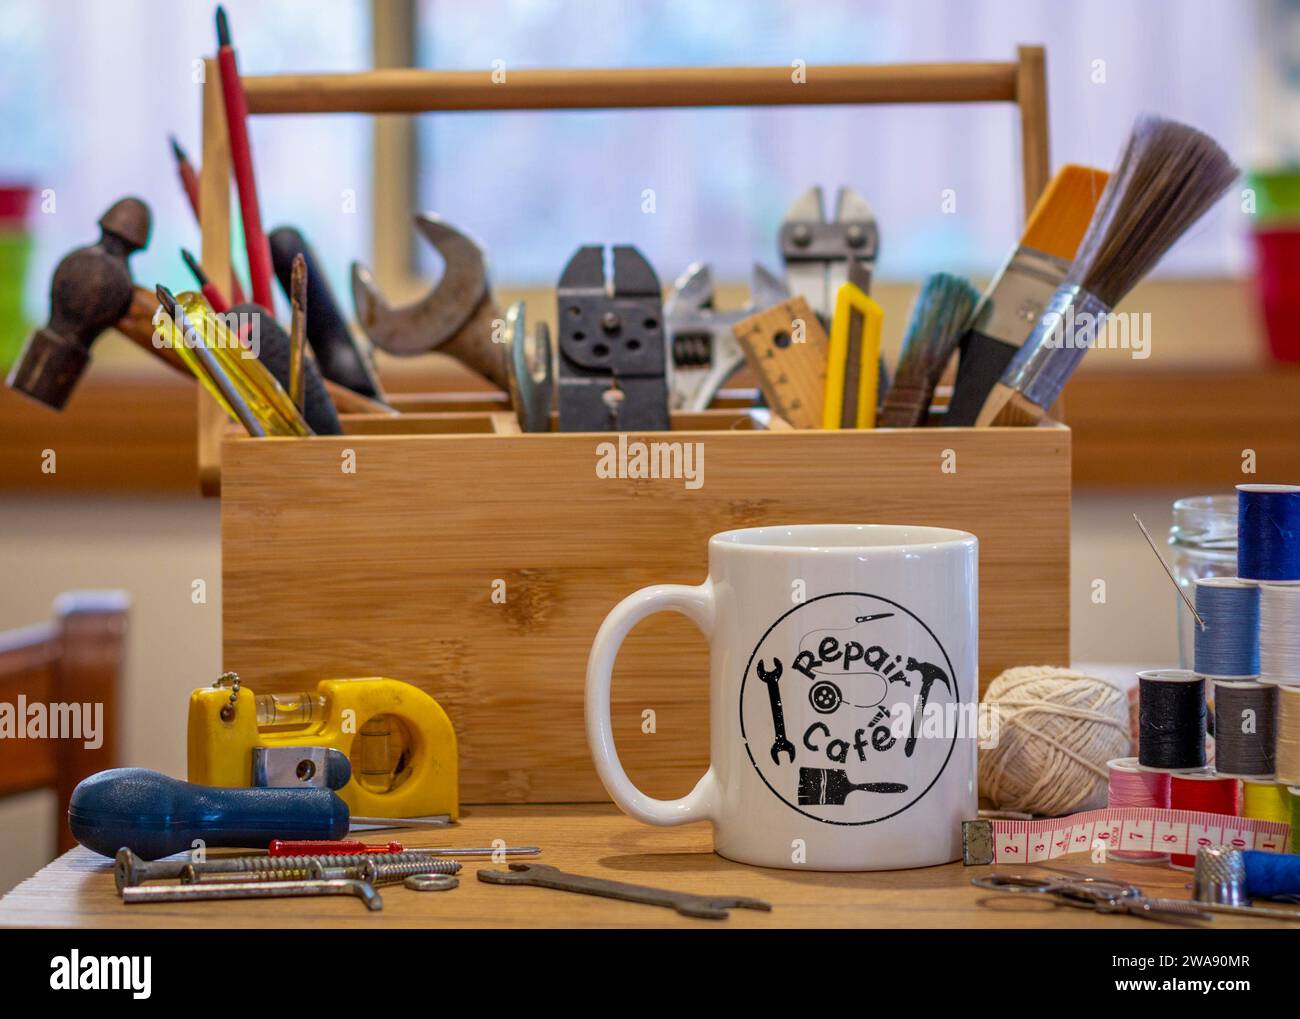 Repair Cafe logo on a cup surrounded by repair tools on table in café used as a repair centre, consumer activism to repair household items Stock Photo